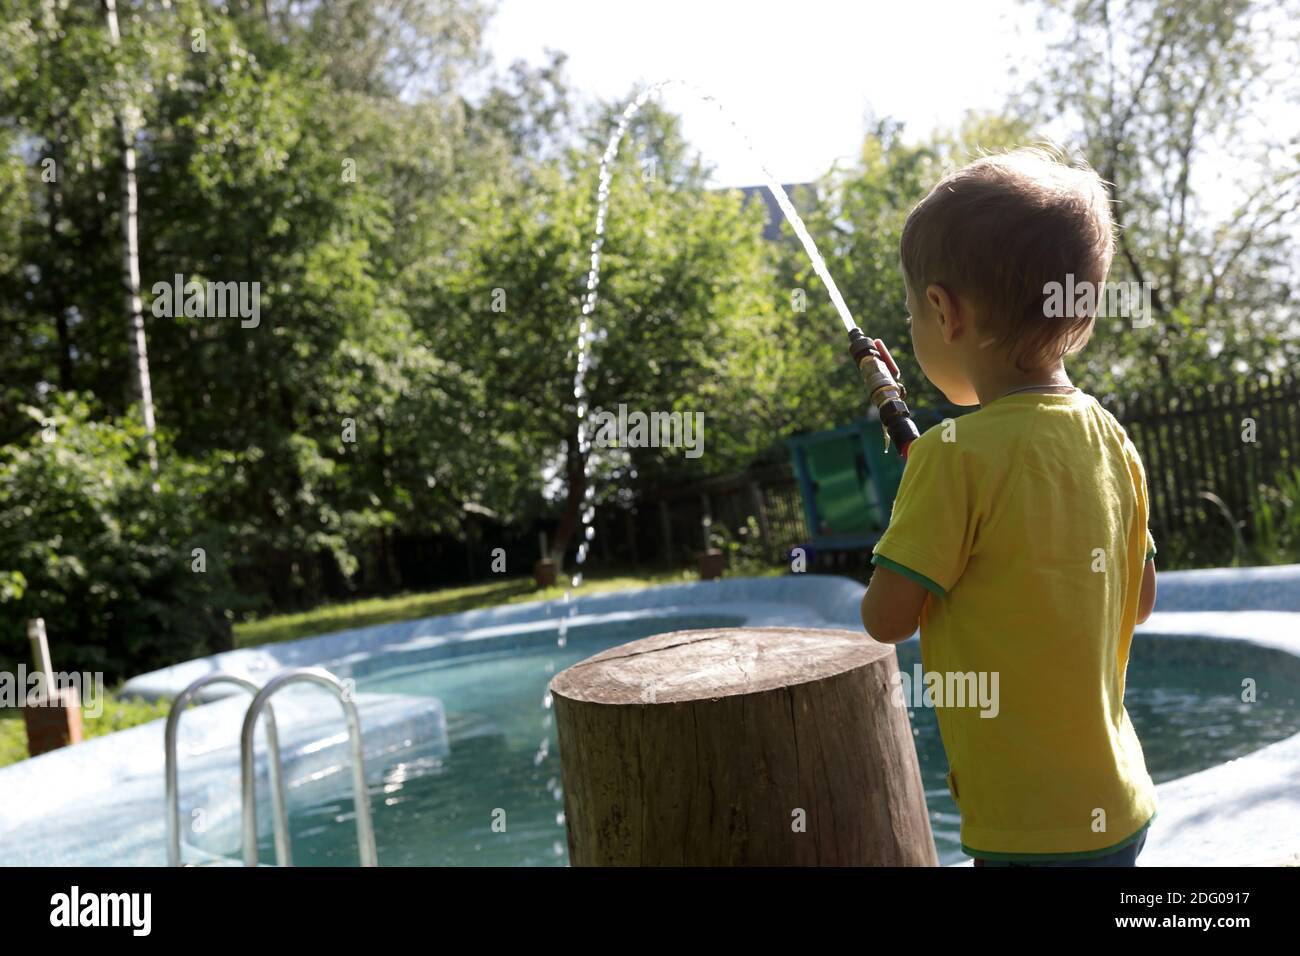 boy-filling-pool-with-water-at-backyard-stock-photo-alamy